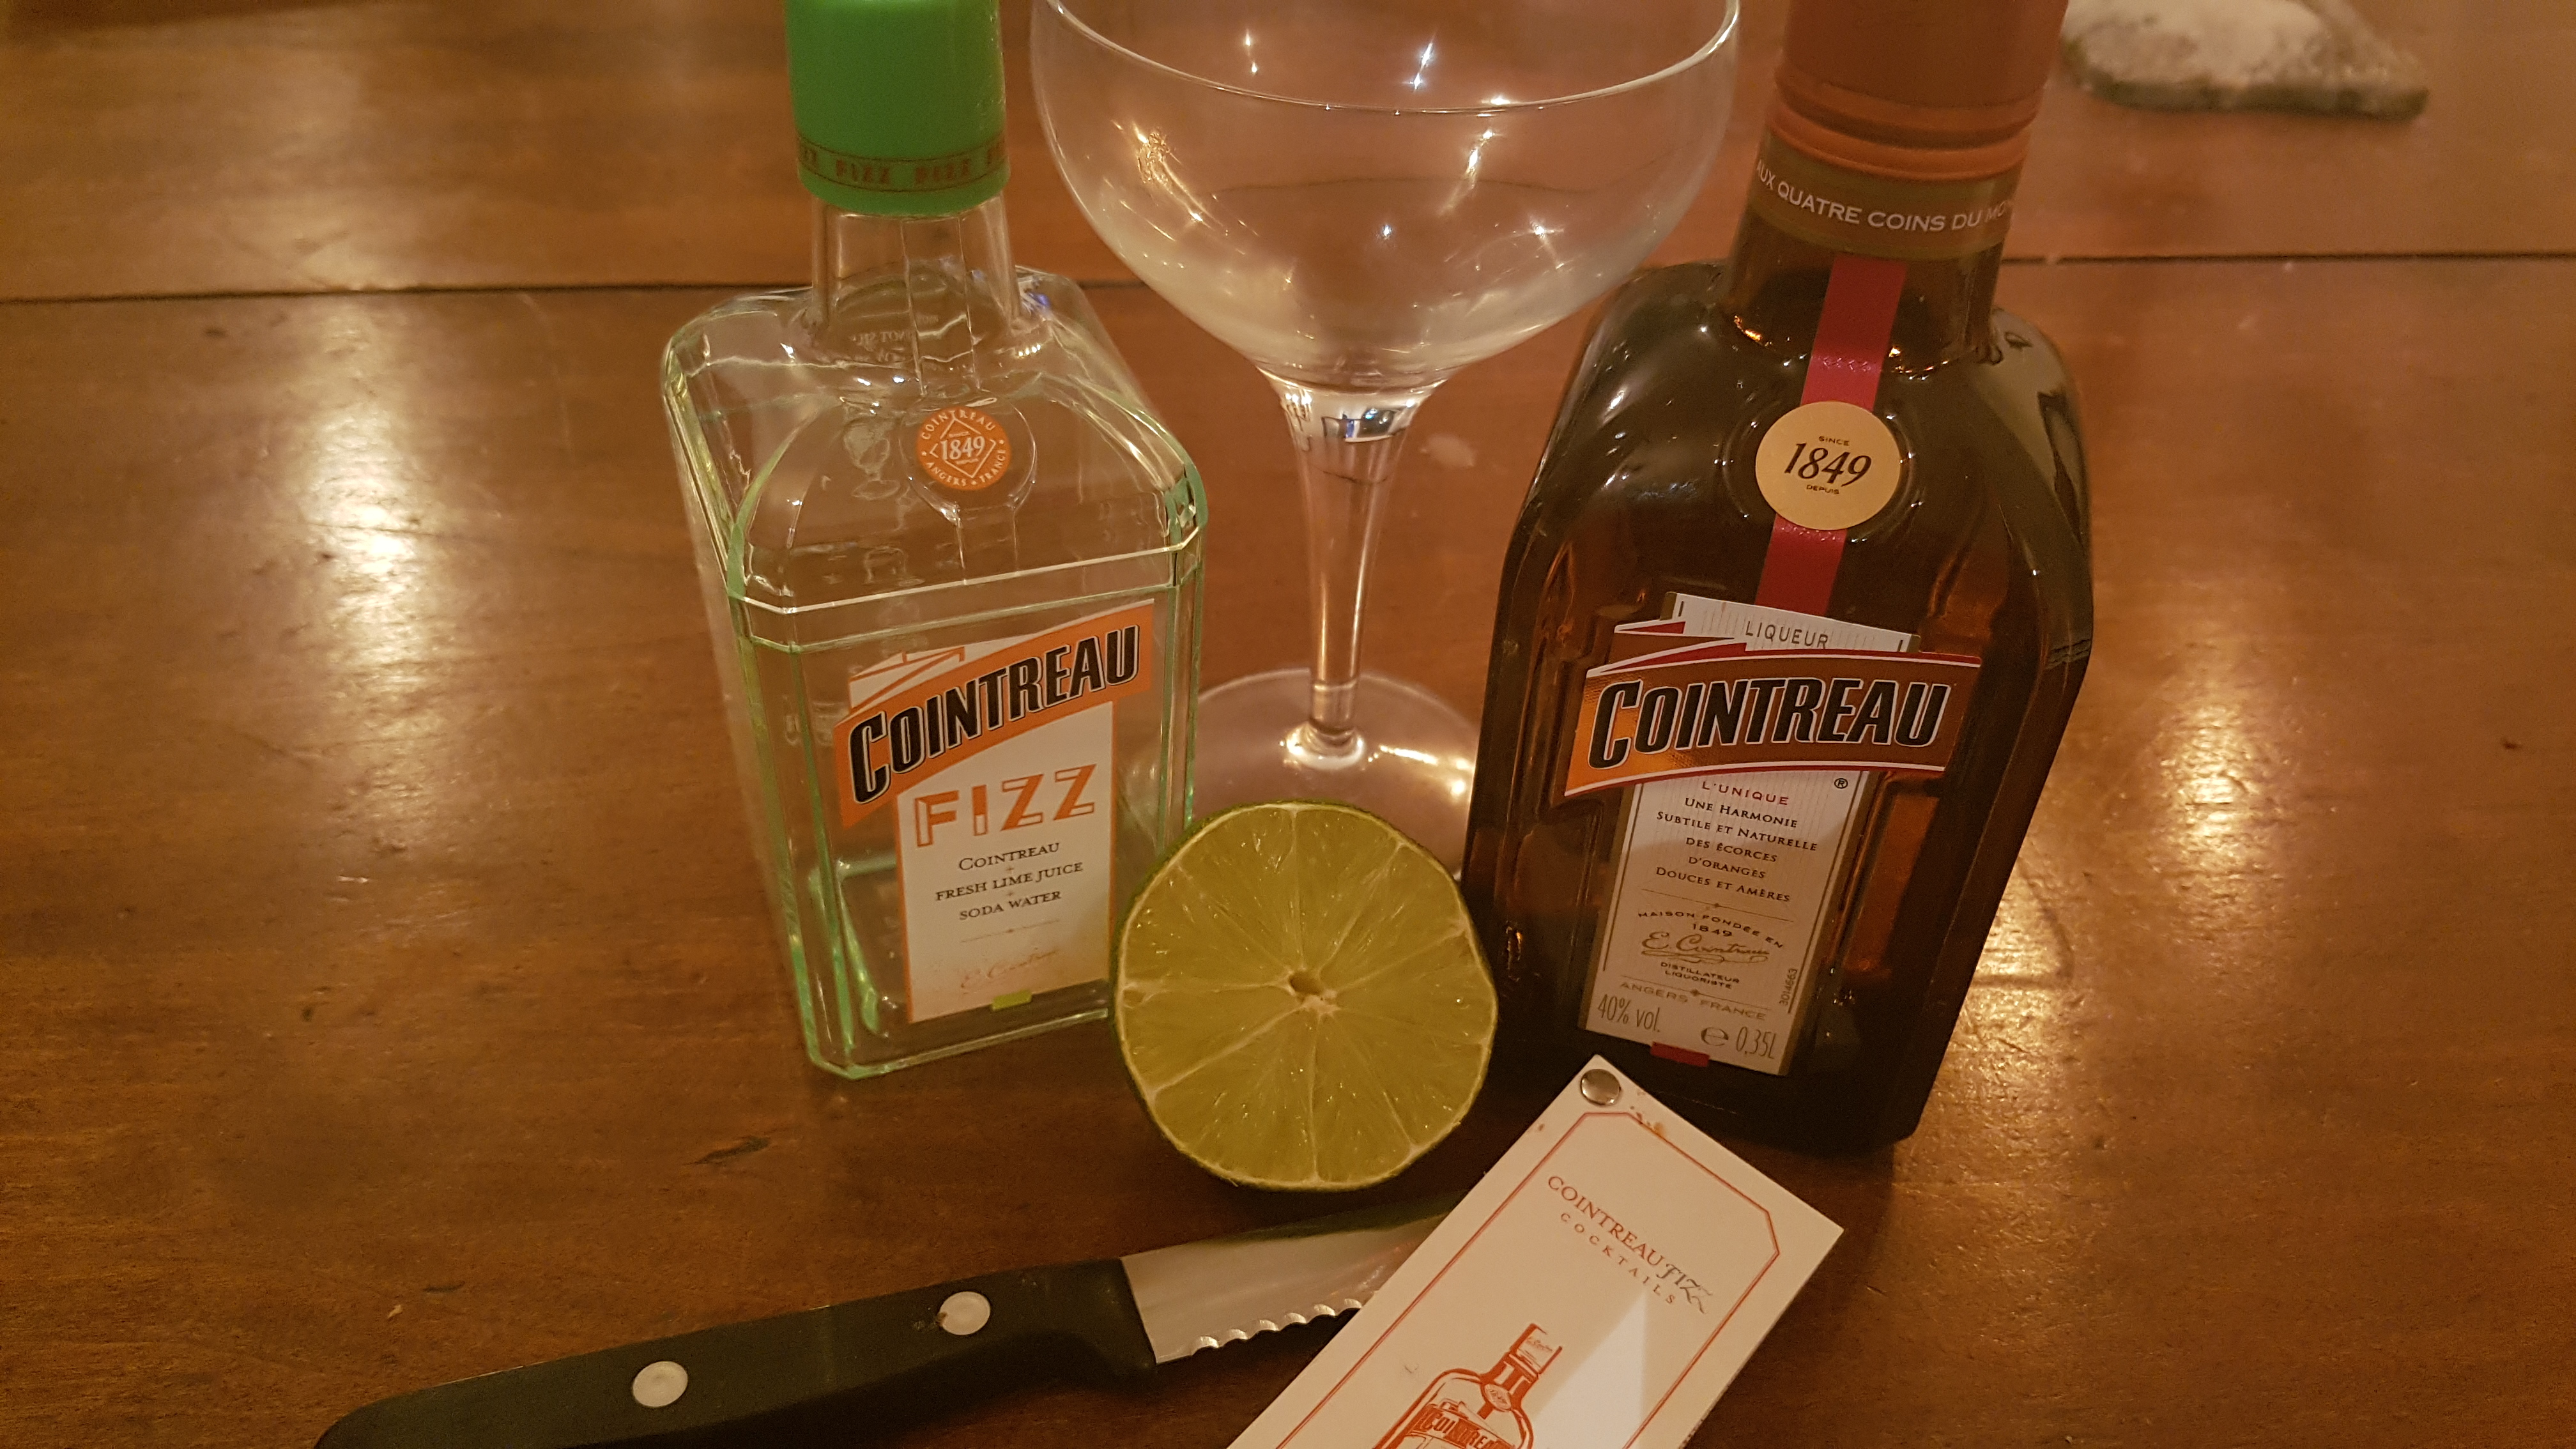 The refreshing Cointreau Fizz